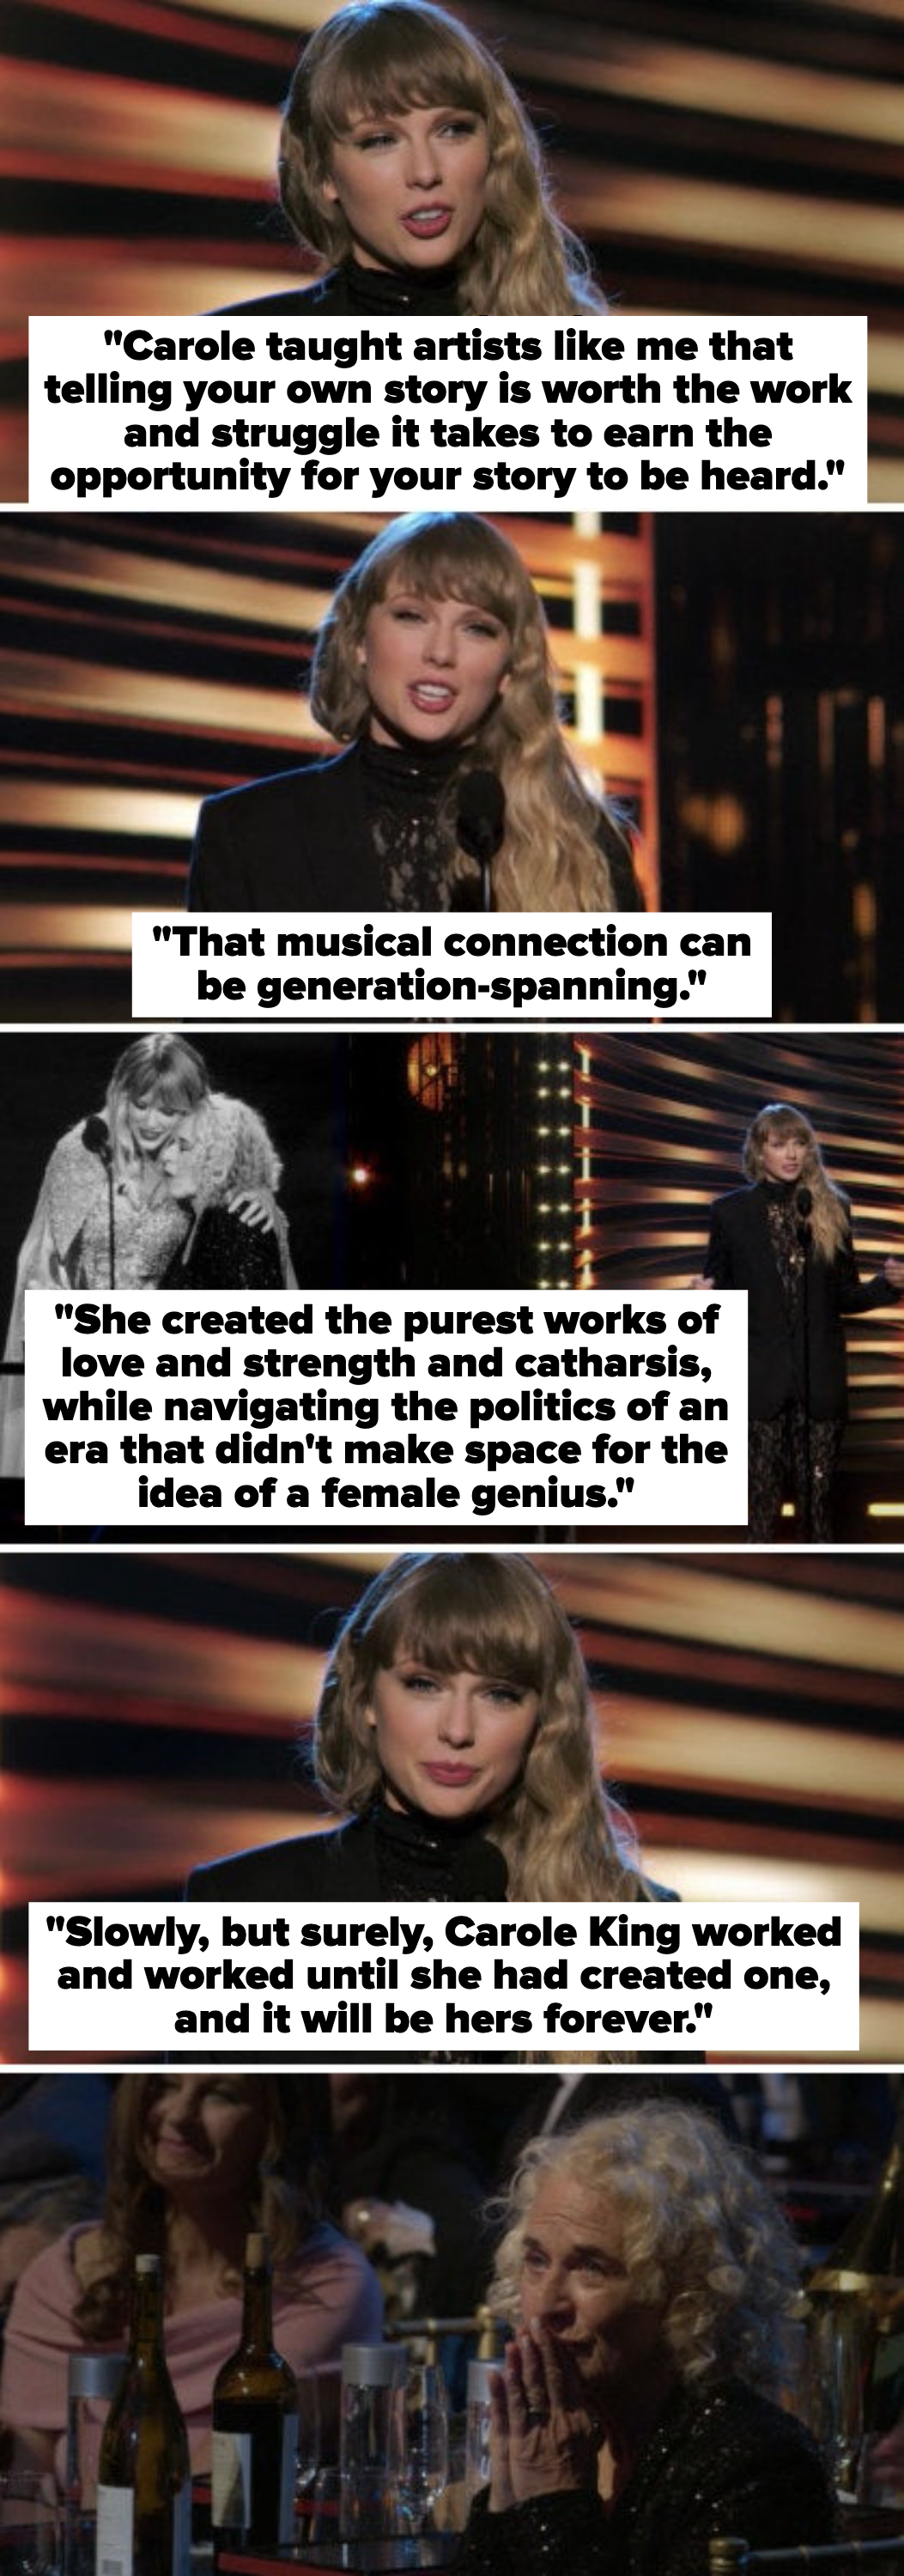 Taylor Swift on Carole King: &quot;She created the purest works of love and strength and catharsis, while navigating the politics of an era that didn&#x27;t make space for the idea of a female genius&quot;